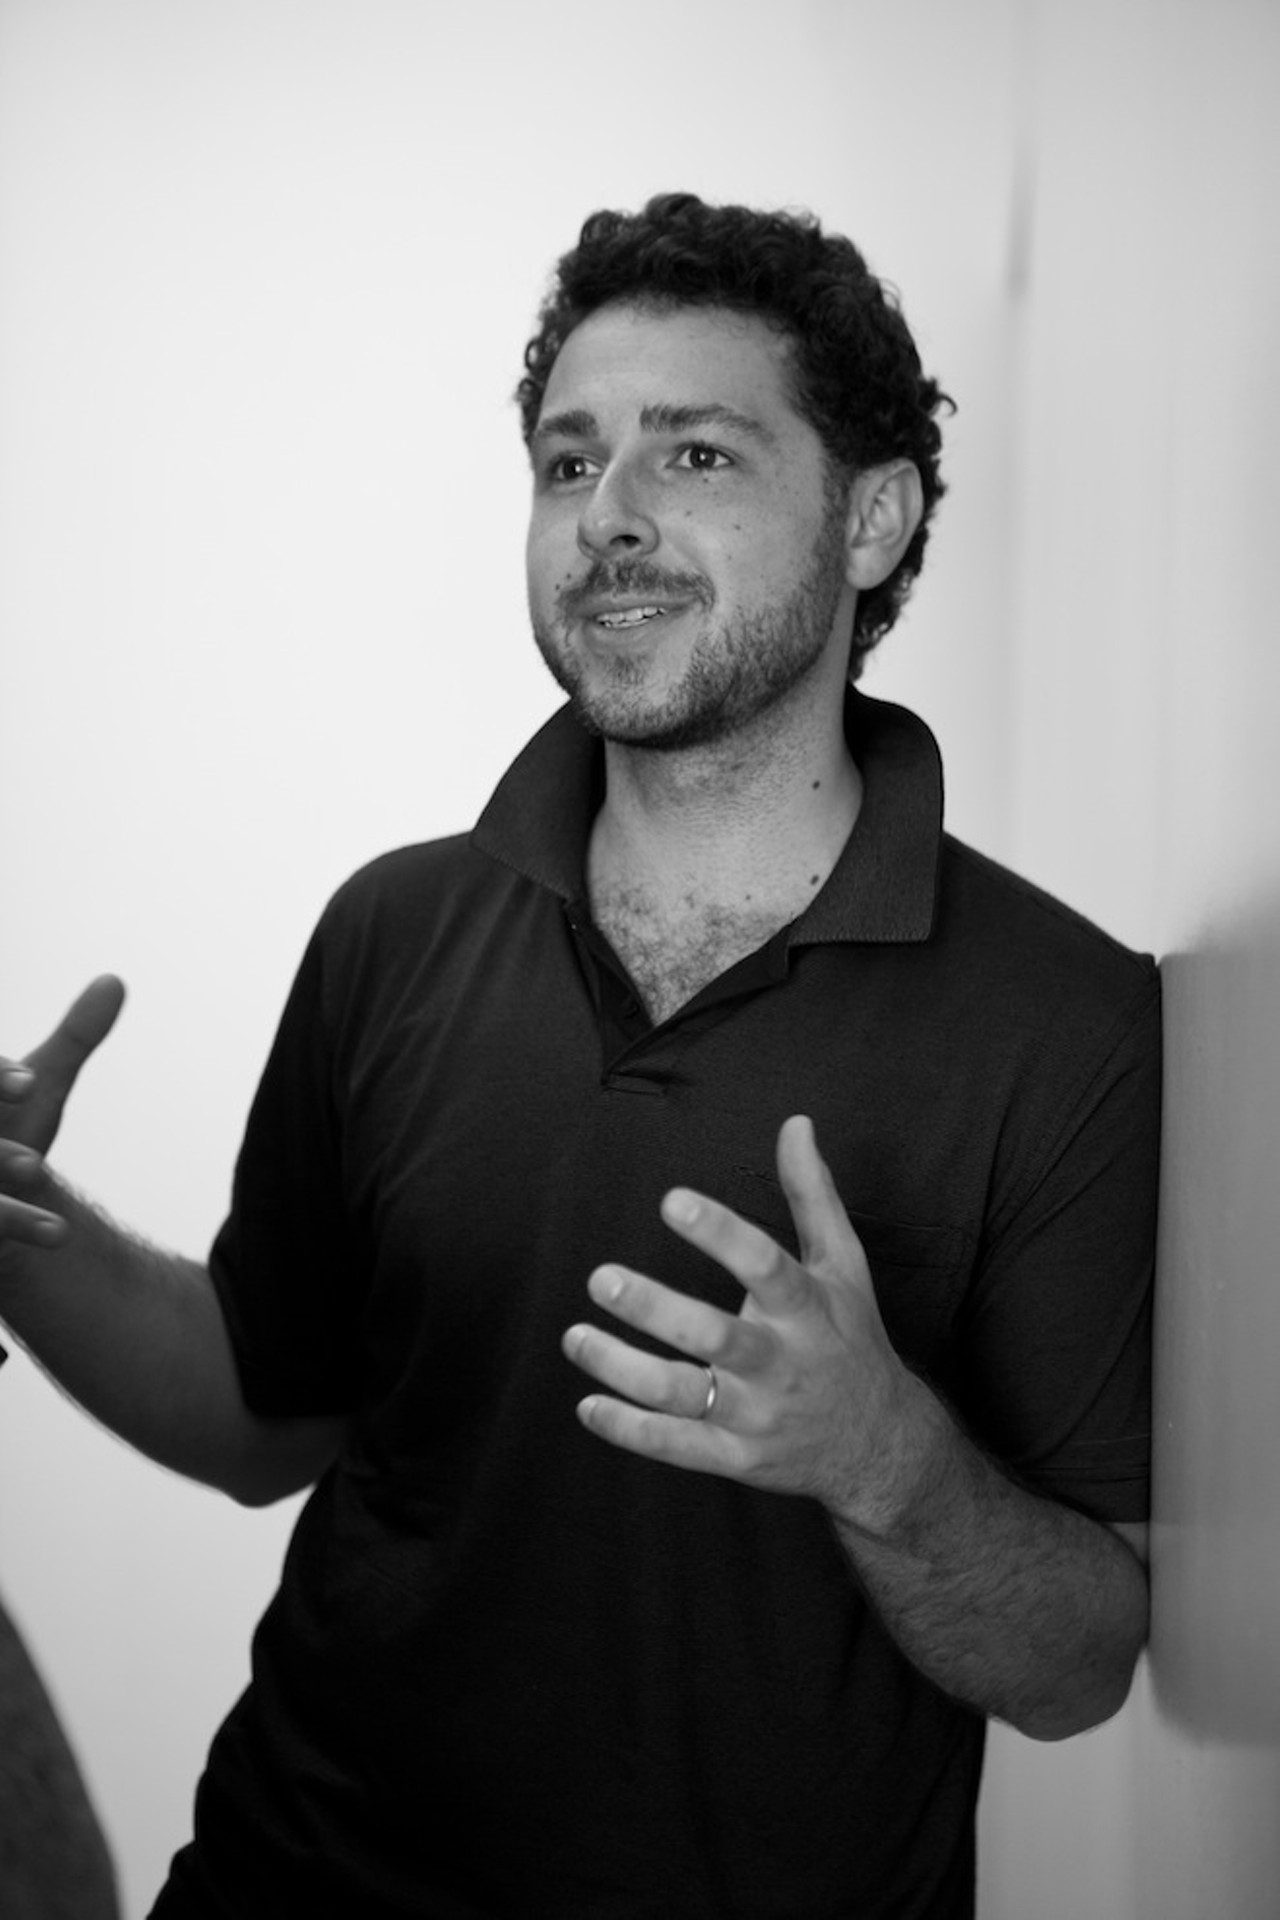 Christopher Marianetti, OneBeat co-founder